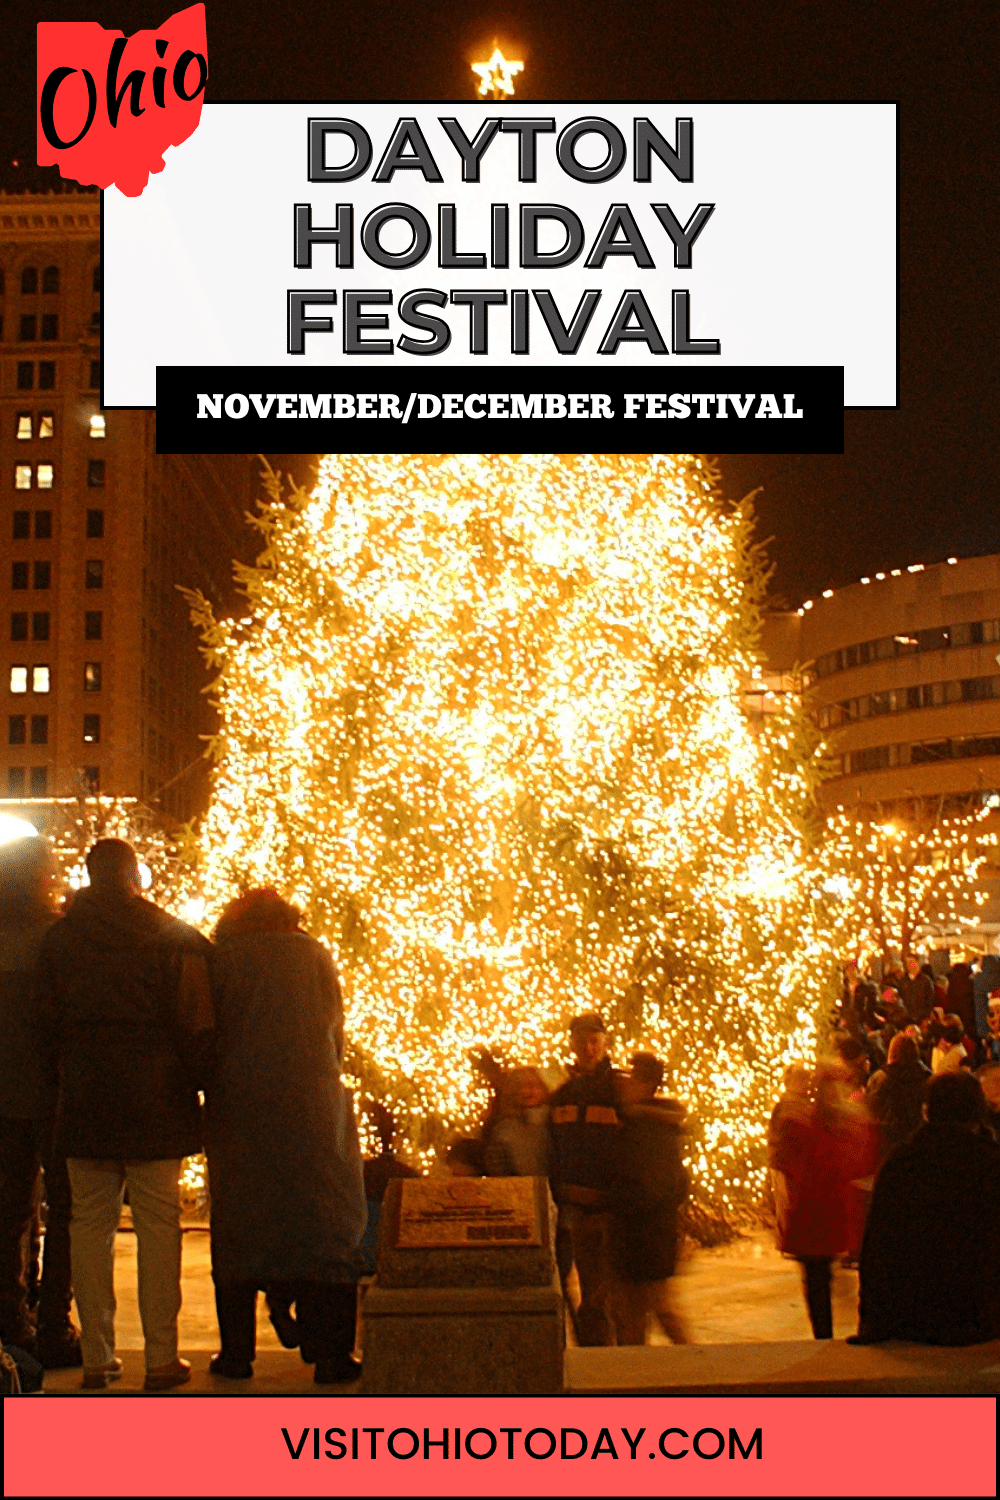 The Dayton Holiday Festival is from November 24 to December 31, 2023. More than a month of family fun awaits at this festive event.